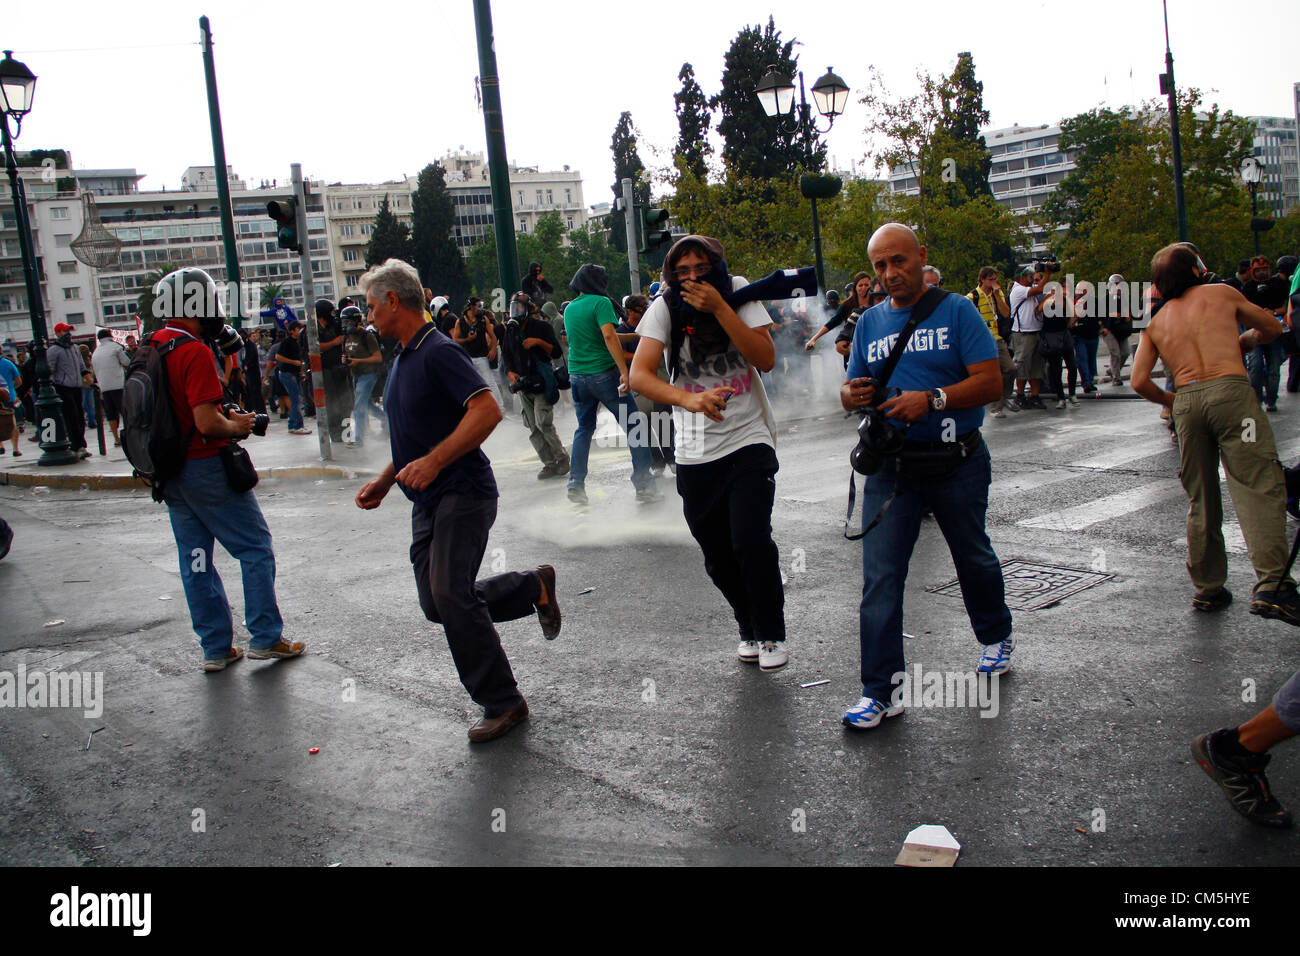 Athens, Greece. 9th October 2012. Protesters run away from tear gas bomb explosion. Violent clashes took place during an anti-Merkel protest as German Chancellor visited Athens in 9th October 2012. Stock Photo